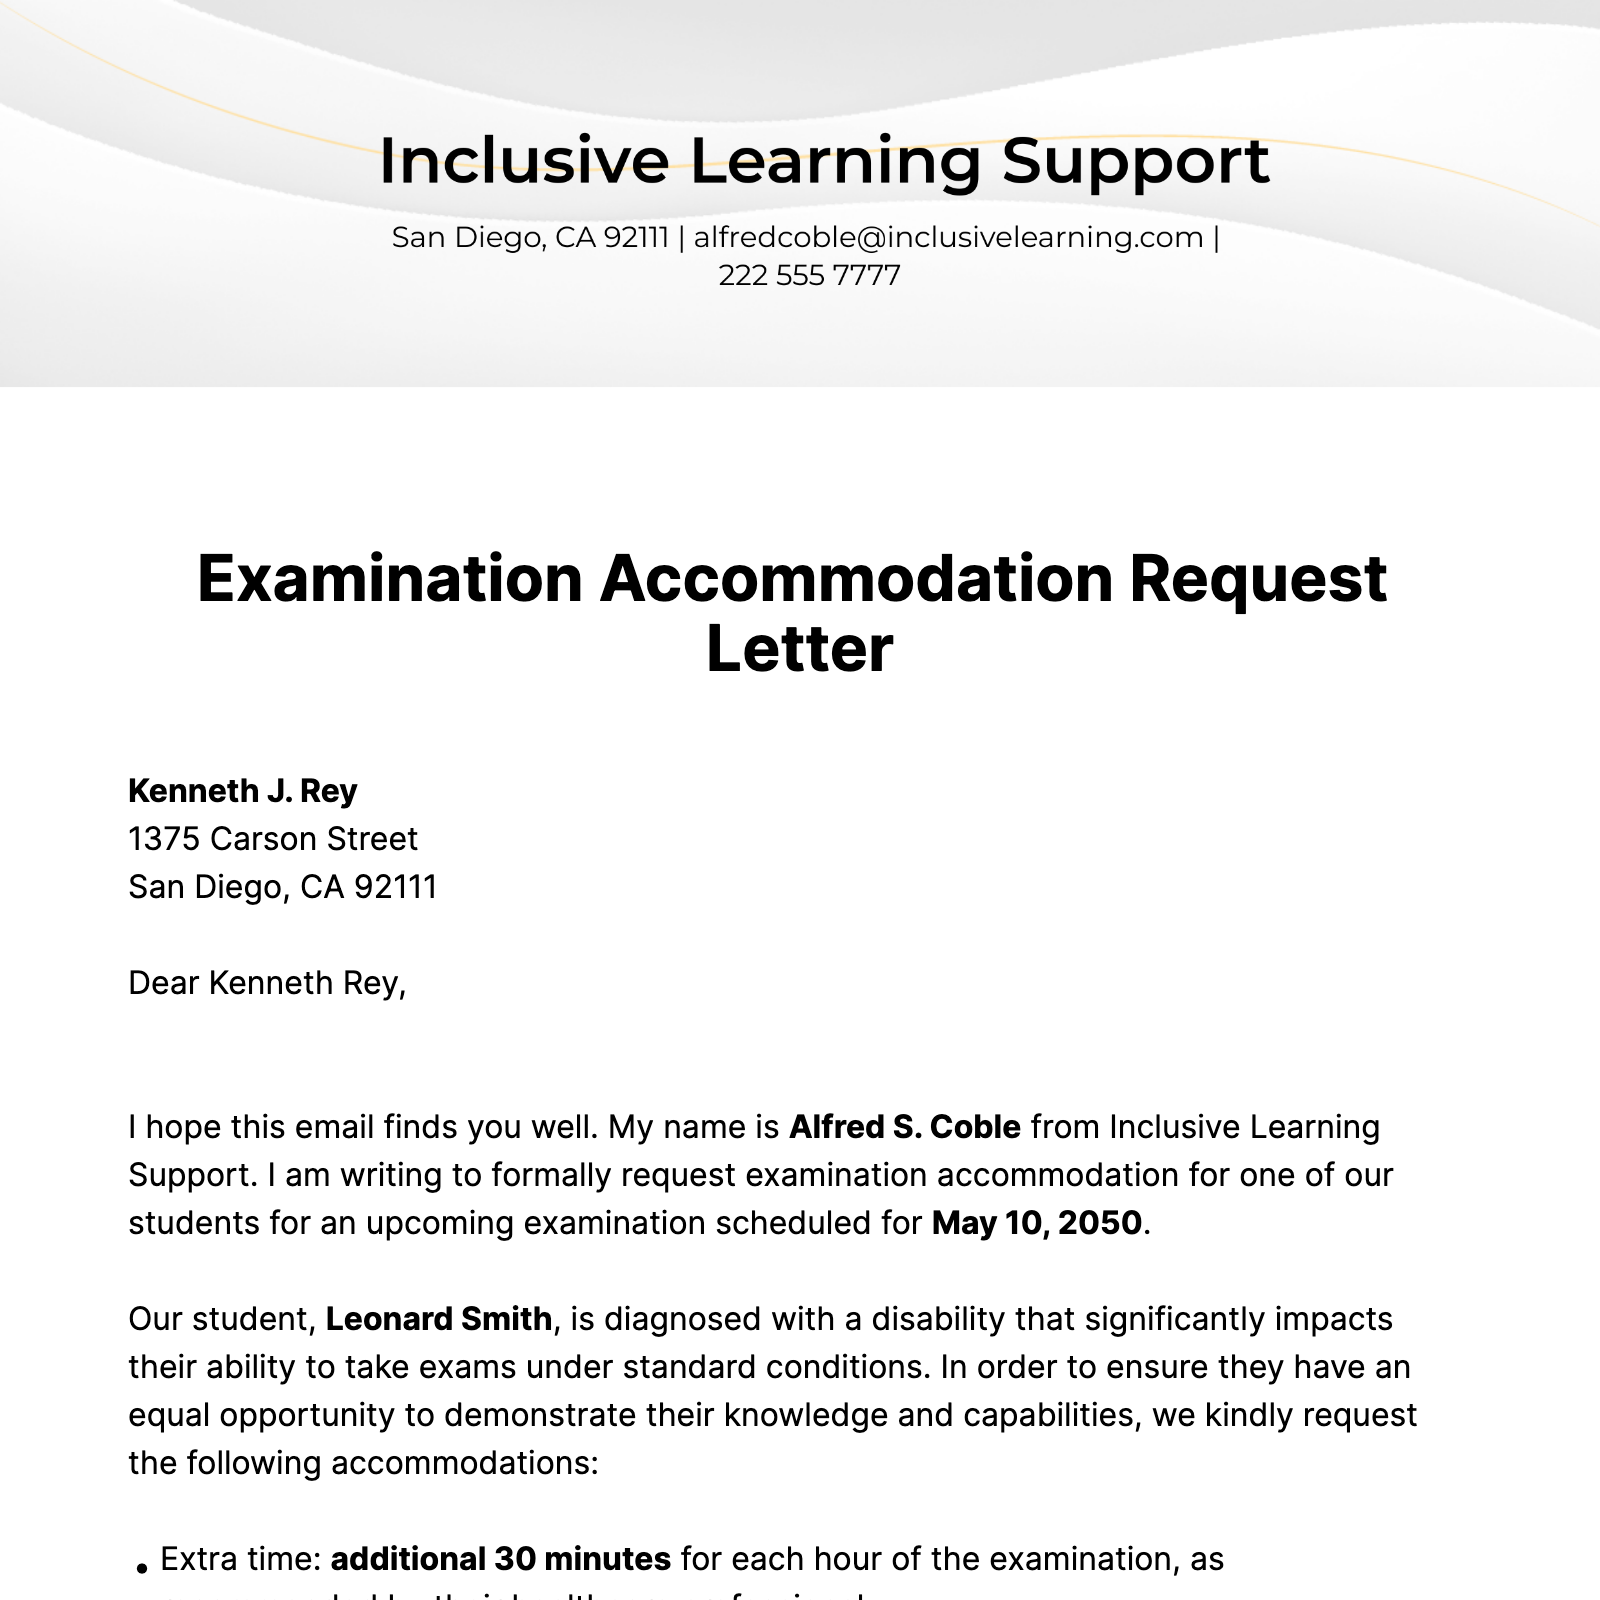 Examination Accommodation Request Letter  Template